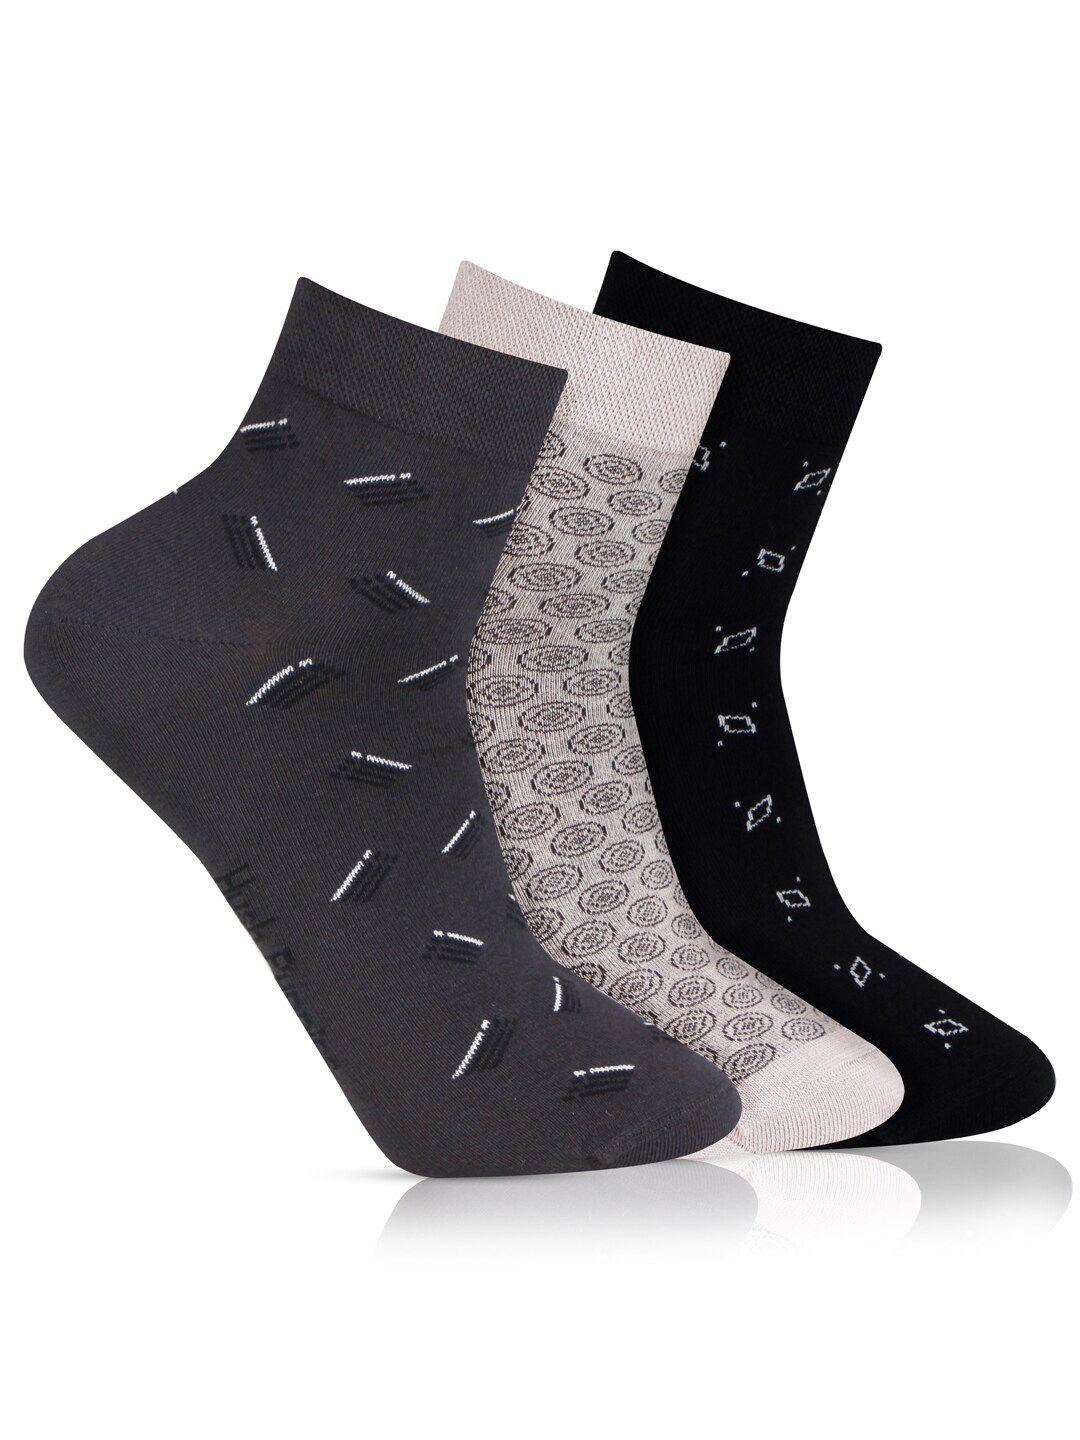 hush-puppies-men-pack-of-3-assorted-ankle-length-socks